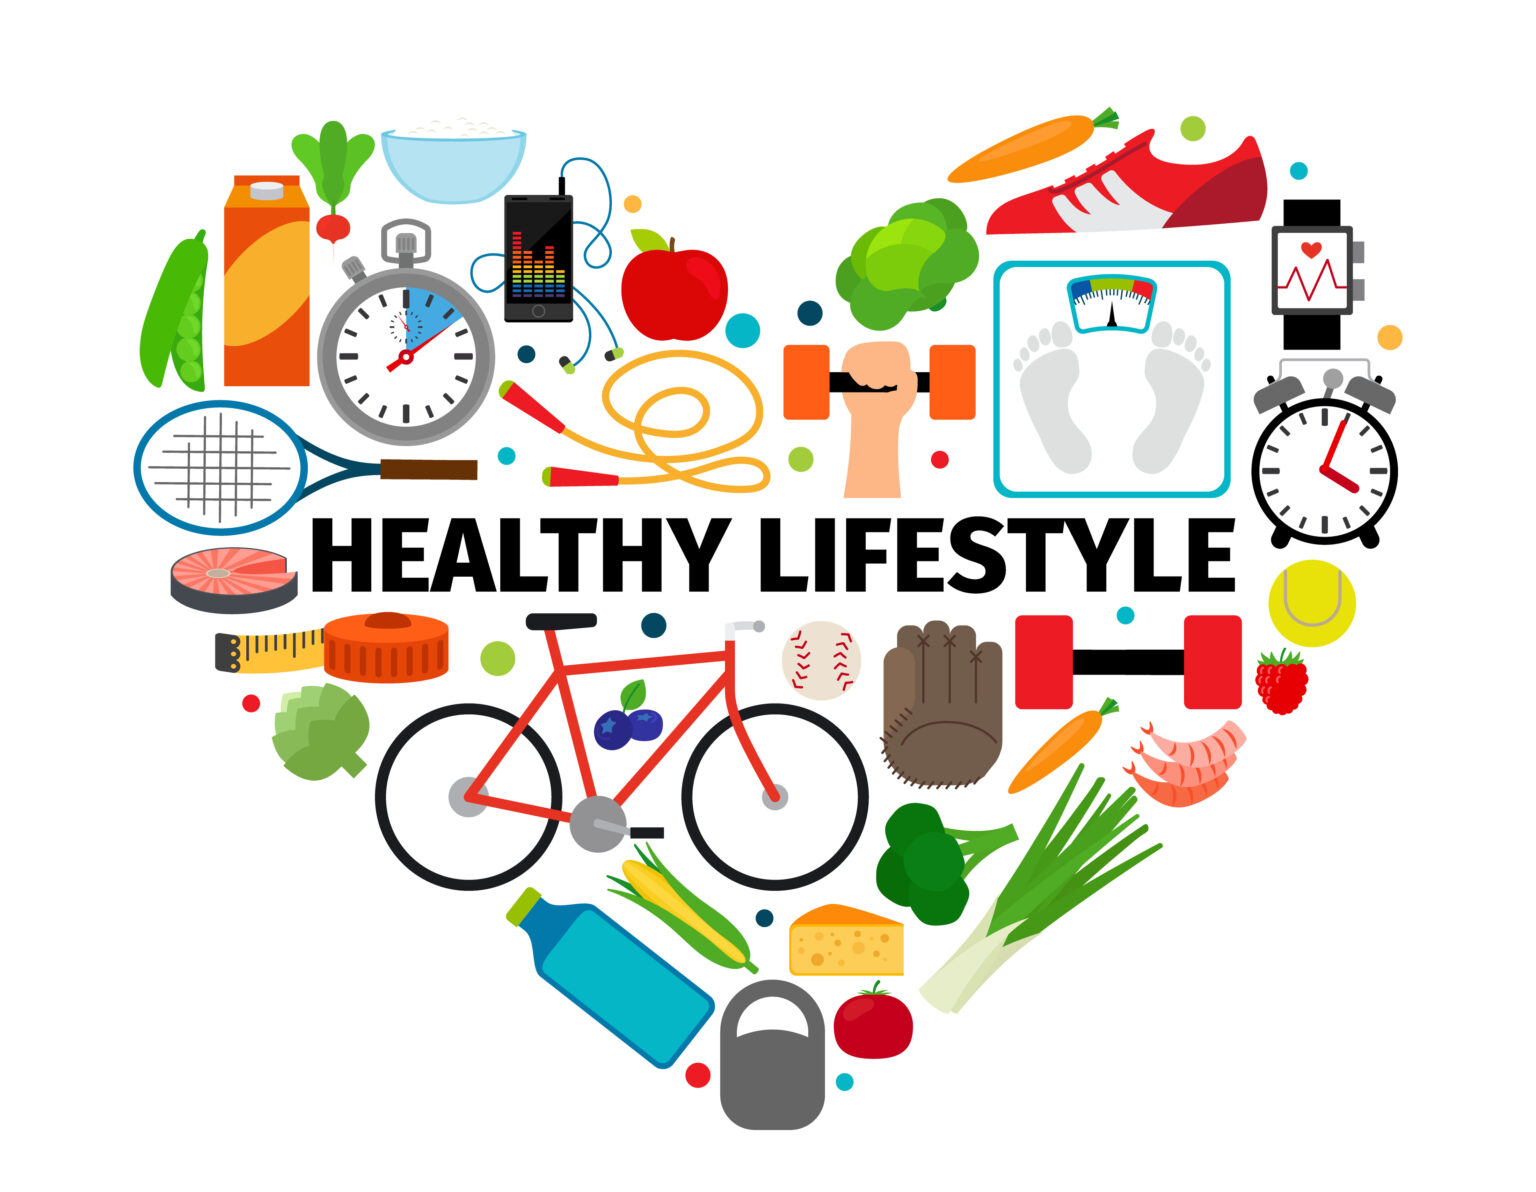 Healthy lifestyle heart emblem. Health, healthy food and active daily routine flat icons vector banner isolated on white background